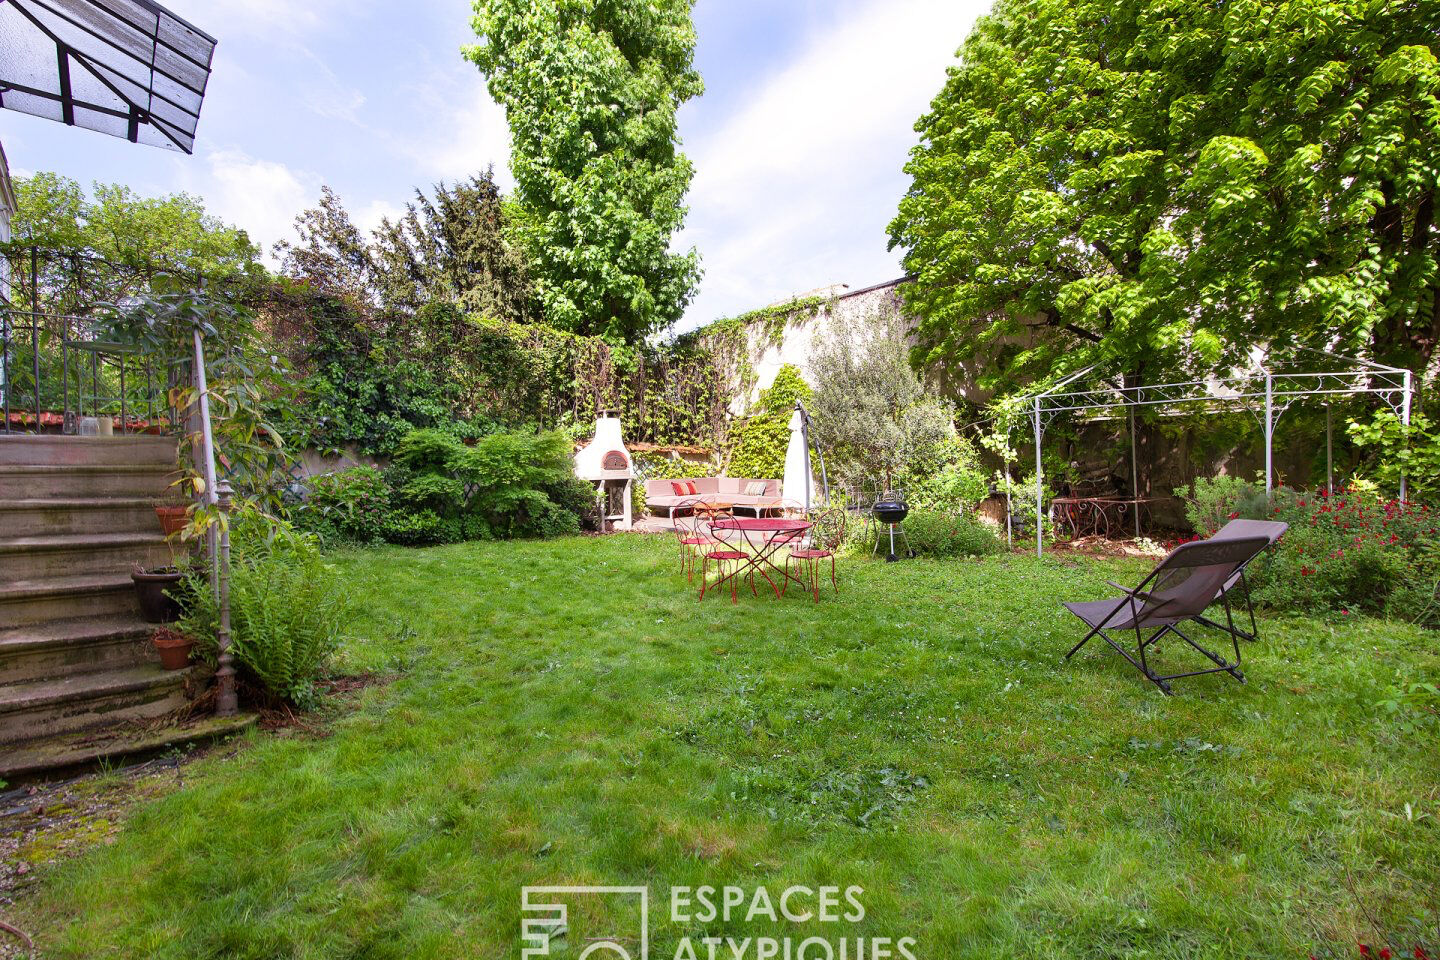 Historic family house in Saint-Mandé and its garden